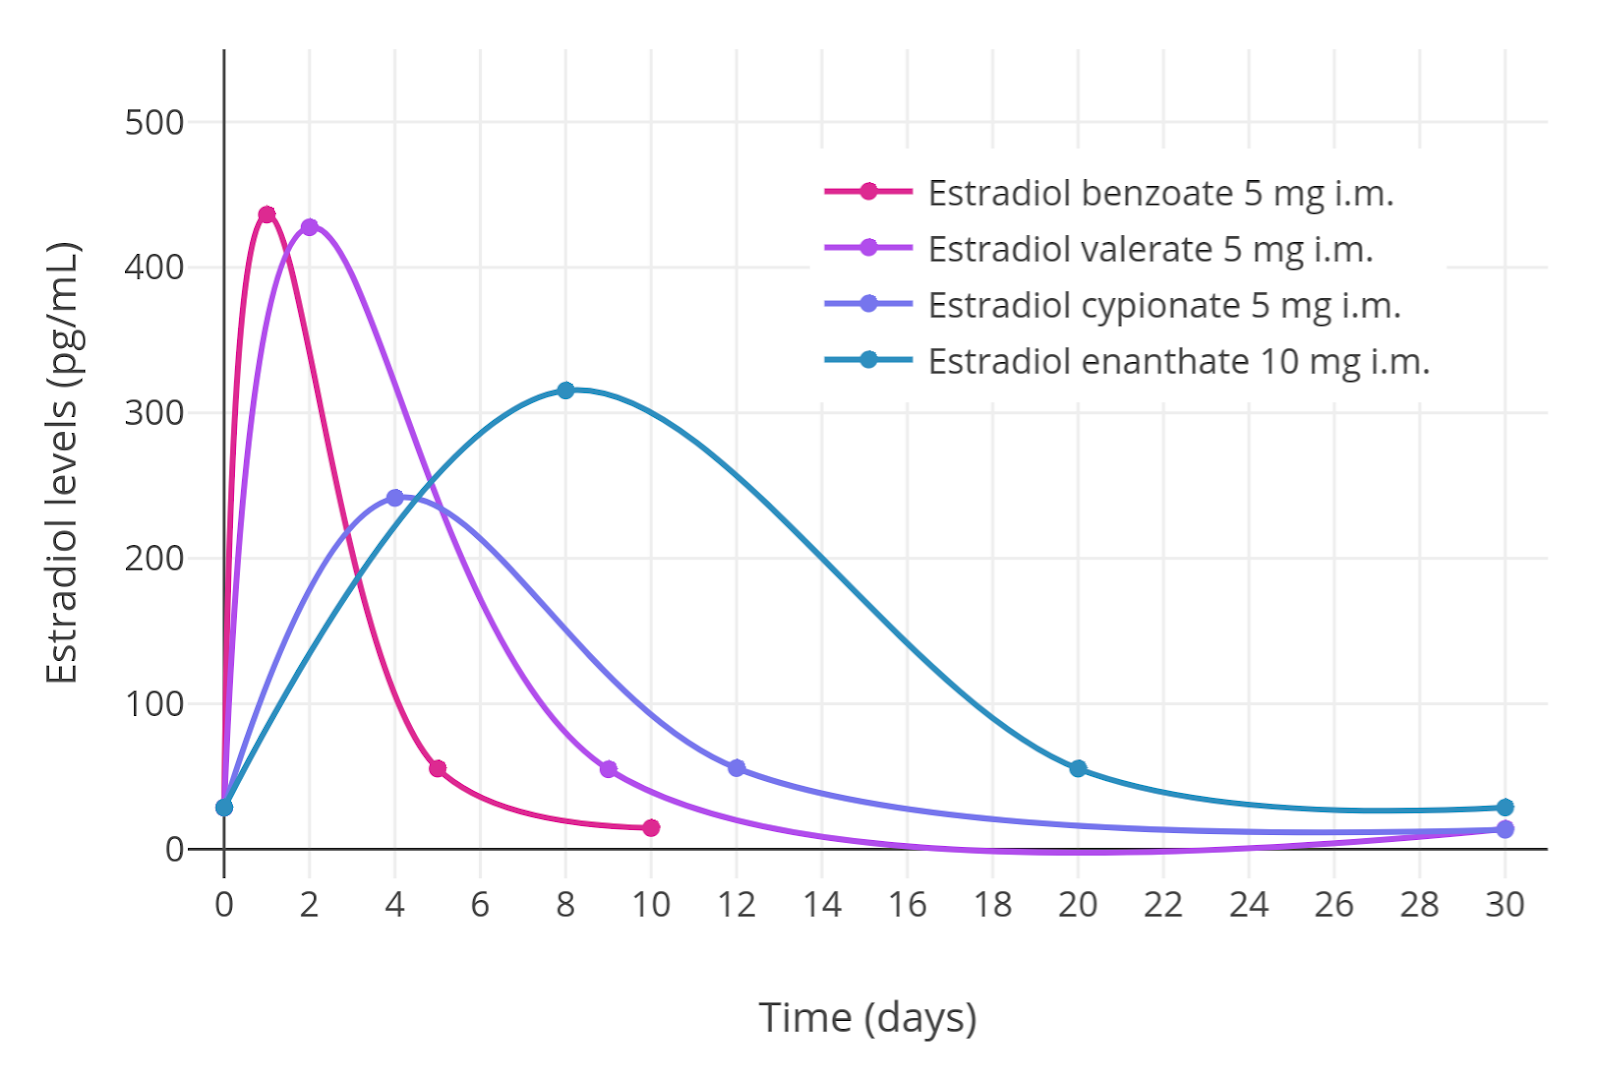 Idealized_curves_of_estradiol_levels_after_injection_of_different_estradiol_esters_in_women